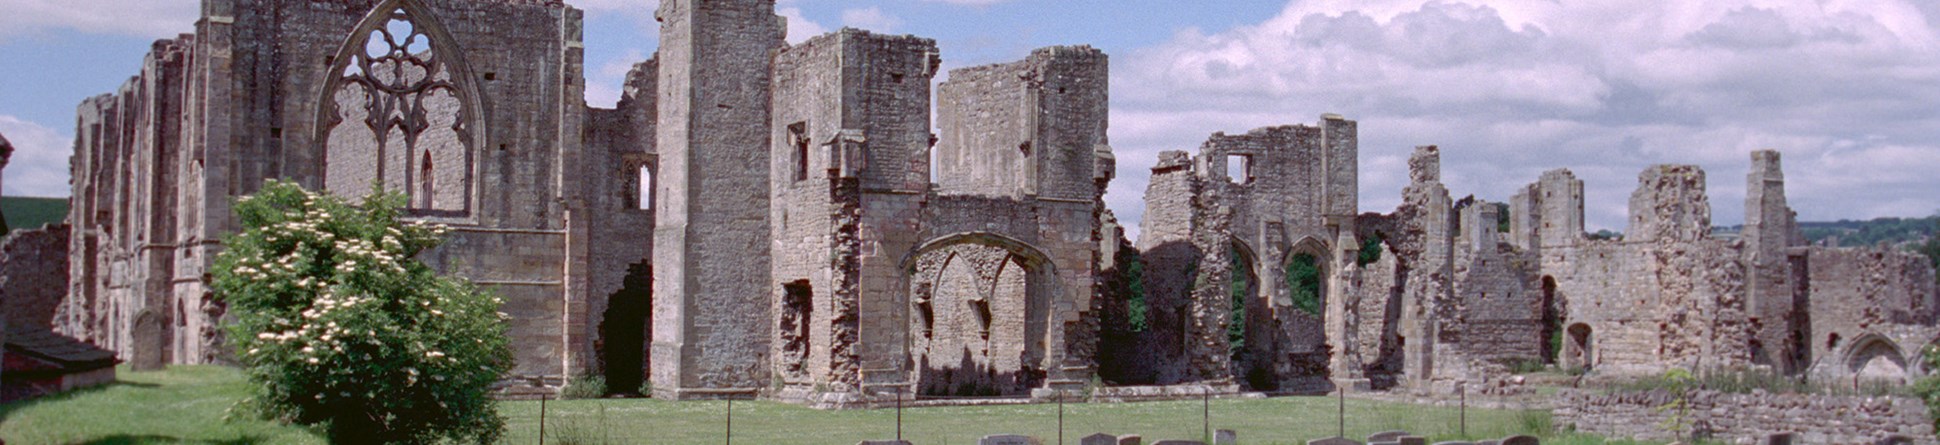 Ruins of Abbey of St Agatha, Easby, North Yorkshire